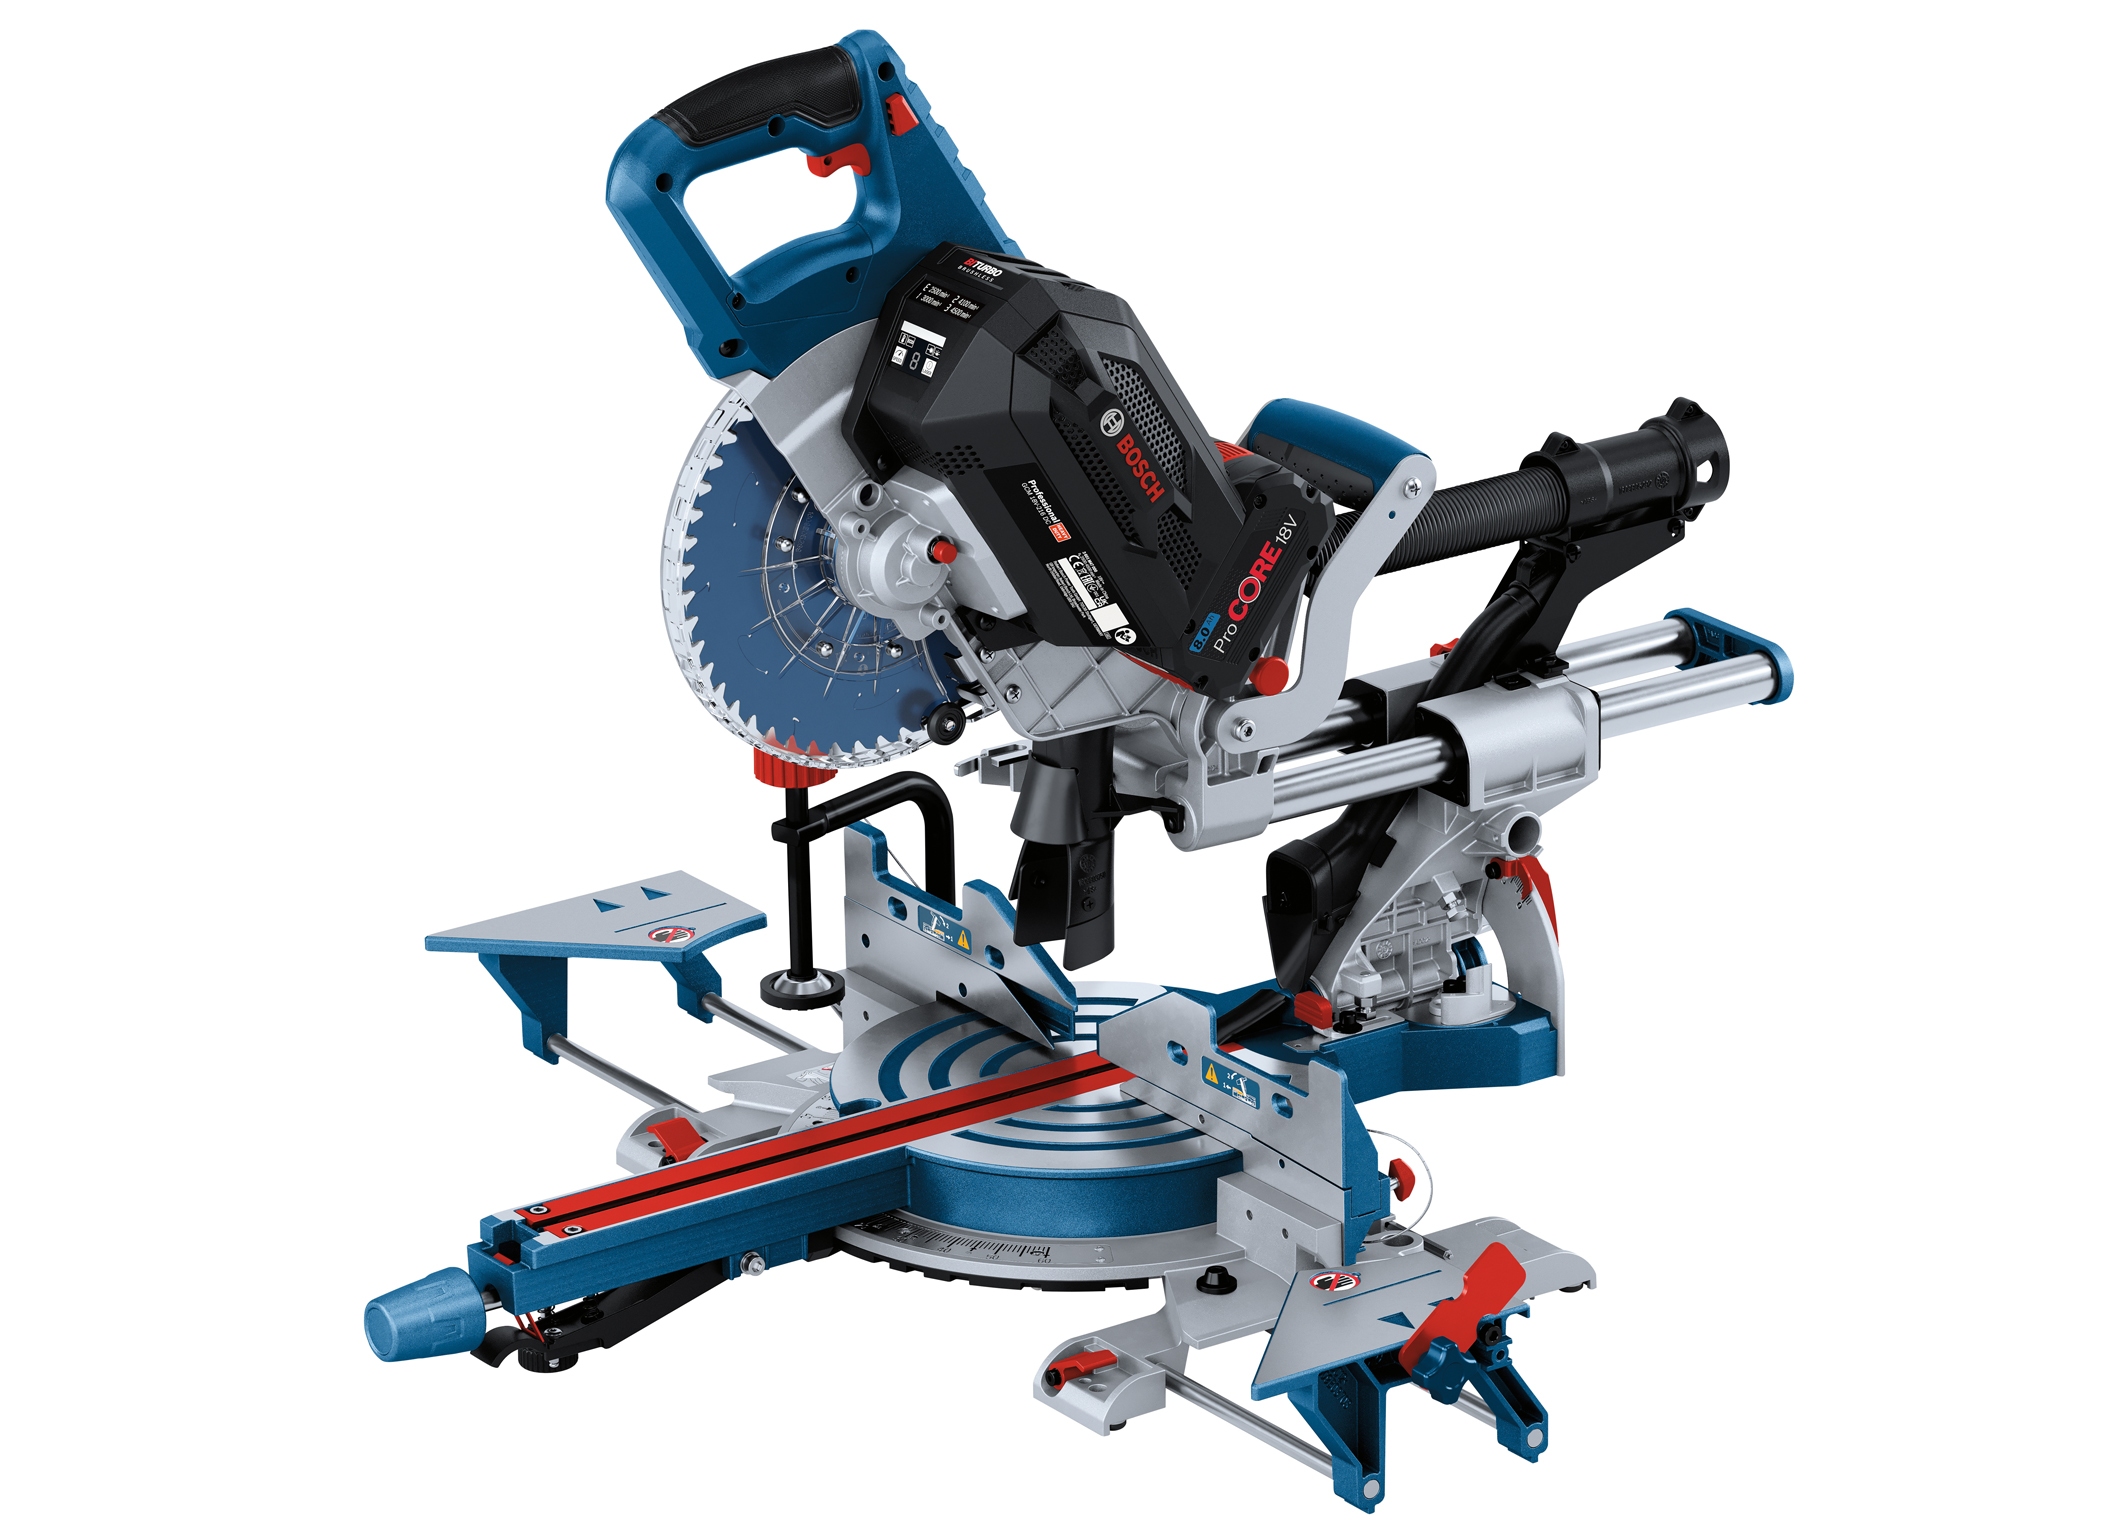 New in the 'Professional 18V System': Biturbo miter saw from Bosch